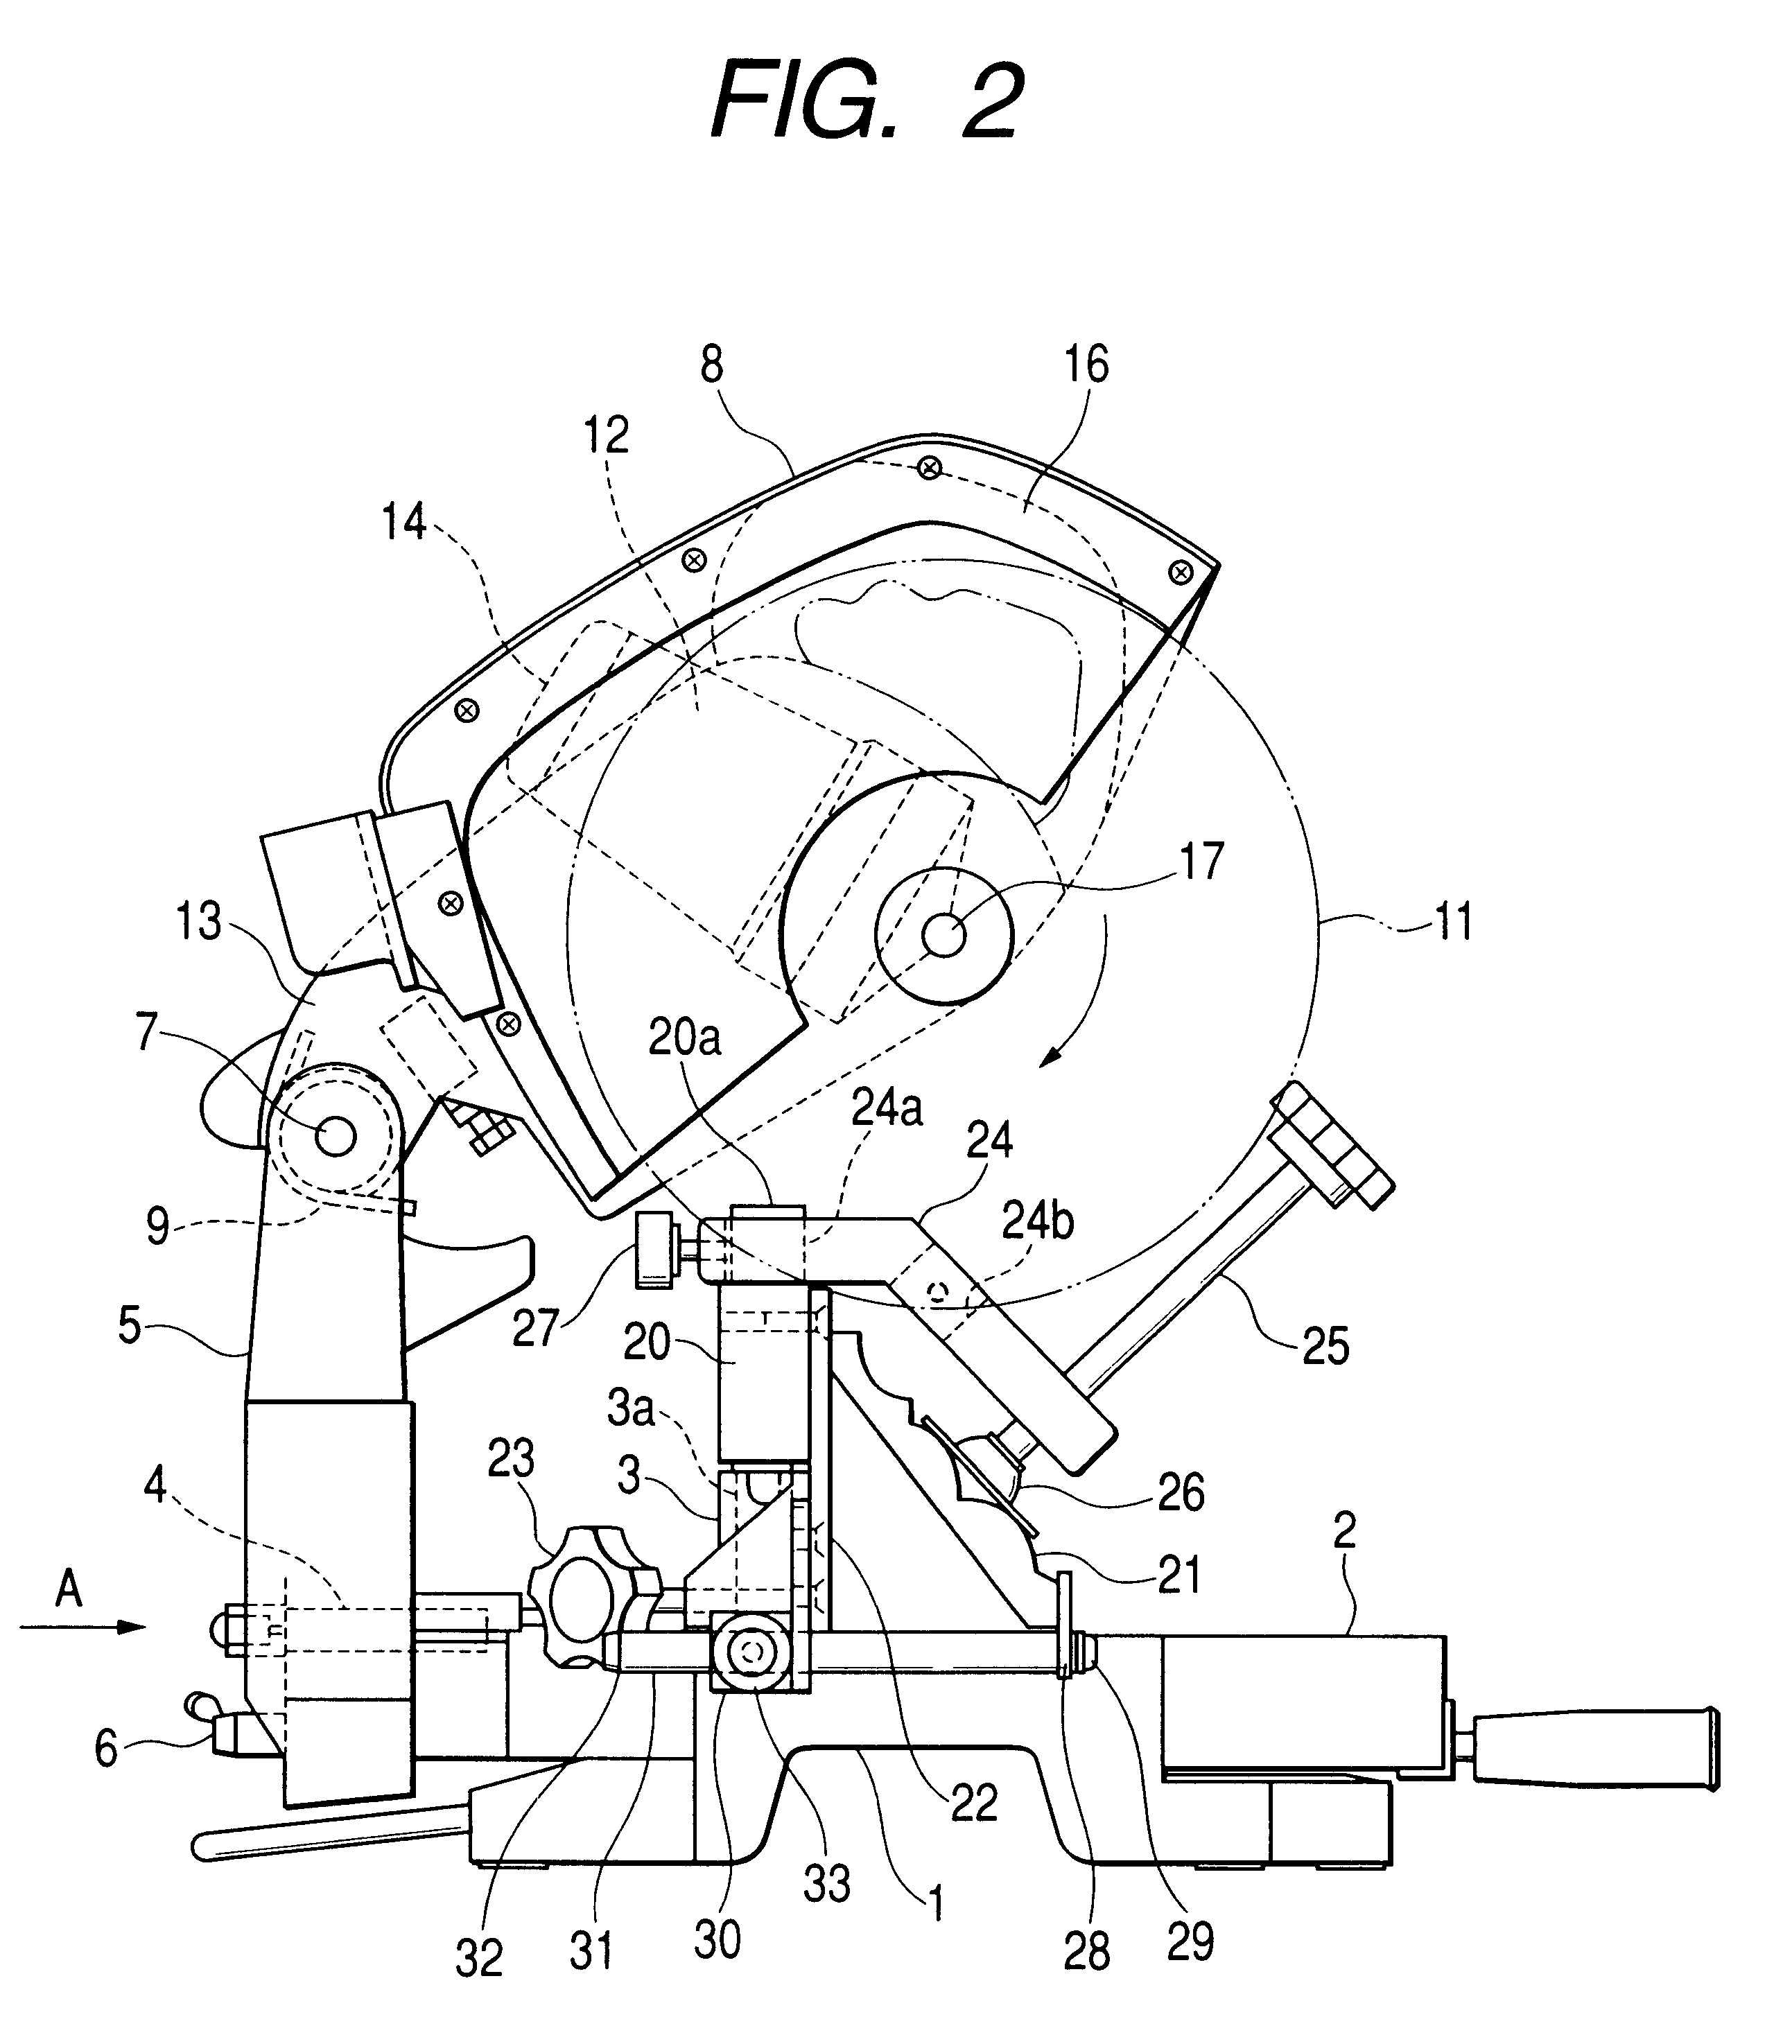 Vice device in compound miter saw